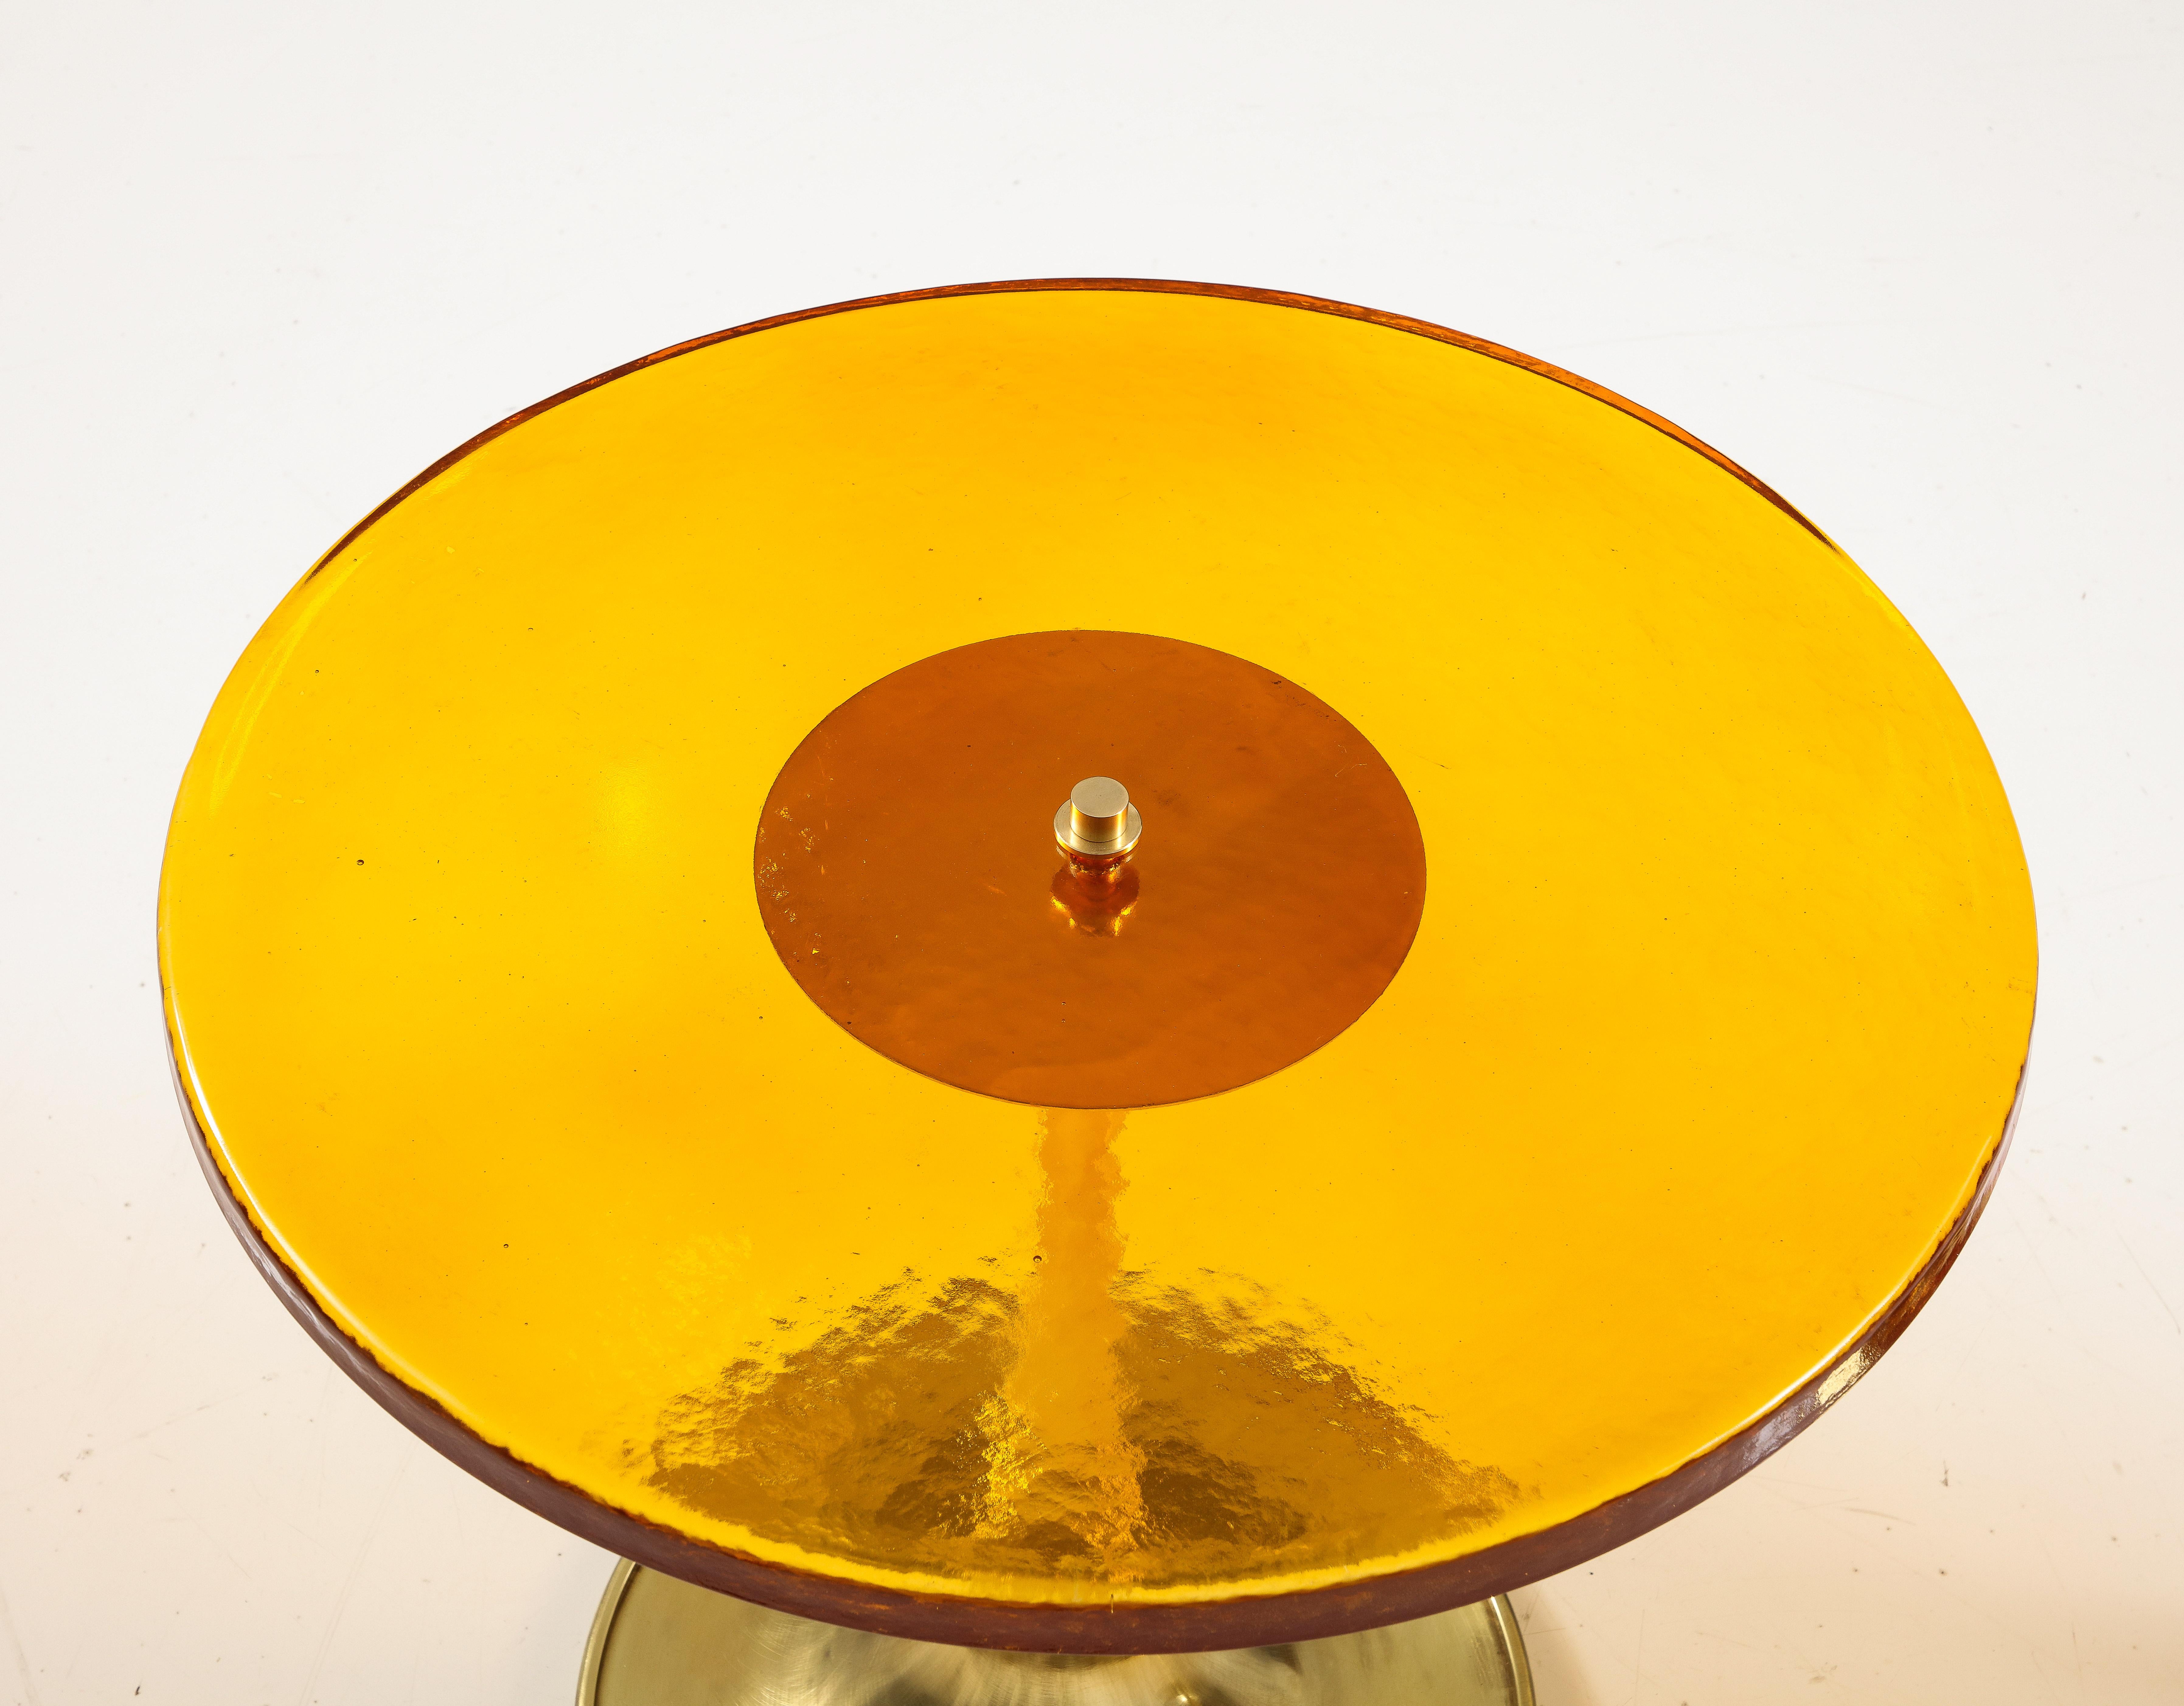 Round amber or deep gold murano glass and brass martini or side table, Italy, 2023. Hand casted 1 inch thick, solid, amber or deep gold (almost orange) colored murano round glass top sits atop a hand turned, trumpet-shaped brass base. A modern flat